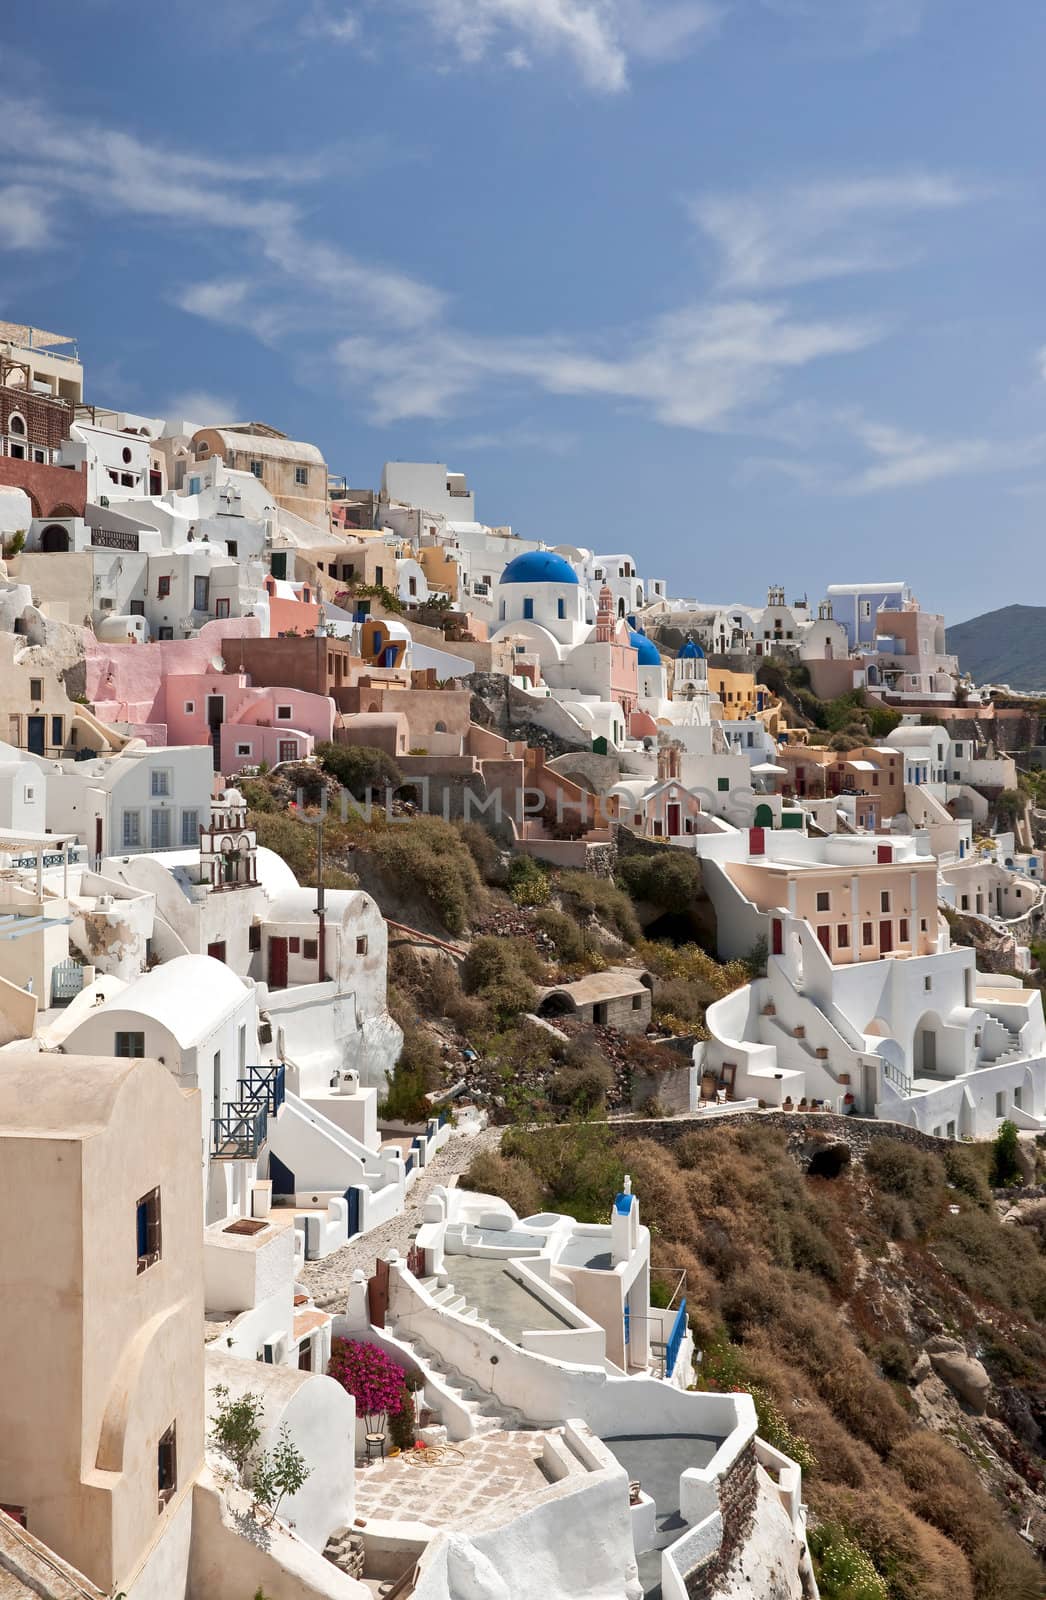 Ia buildings of typical architecture in Santorini island